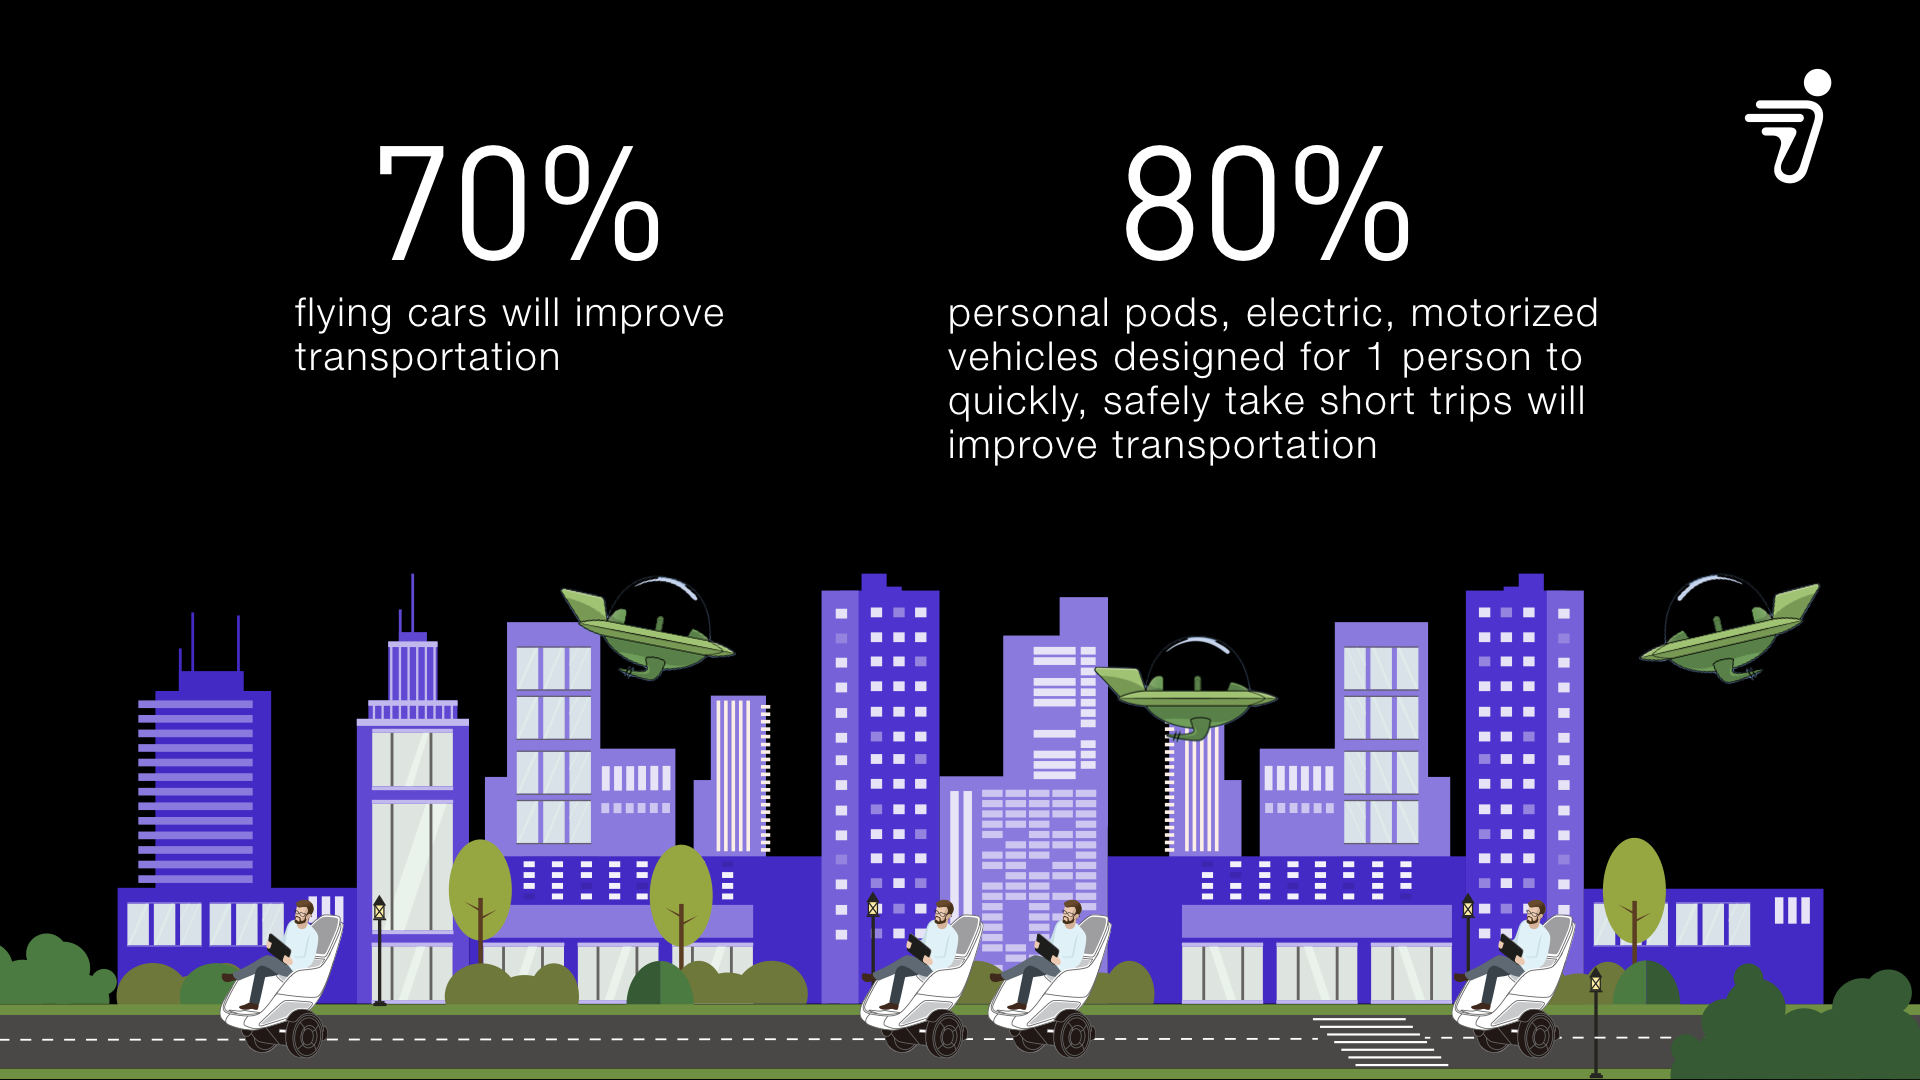 Most Americans Believe Jetson’s Flying Car World Will Become a Reality and That They Will Improve Transportation in Cities